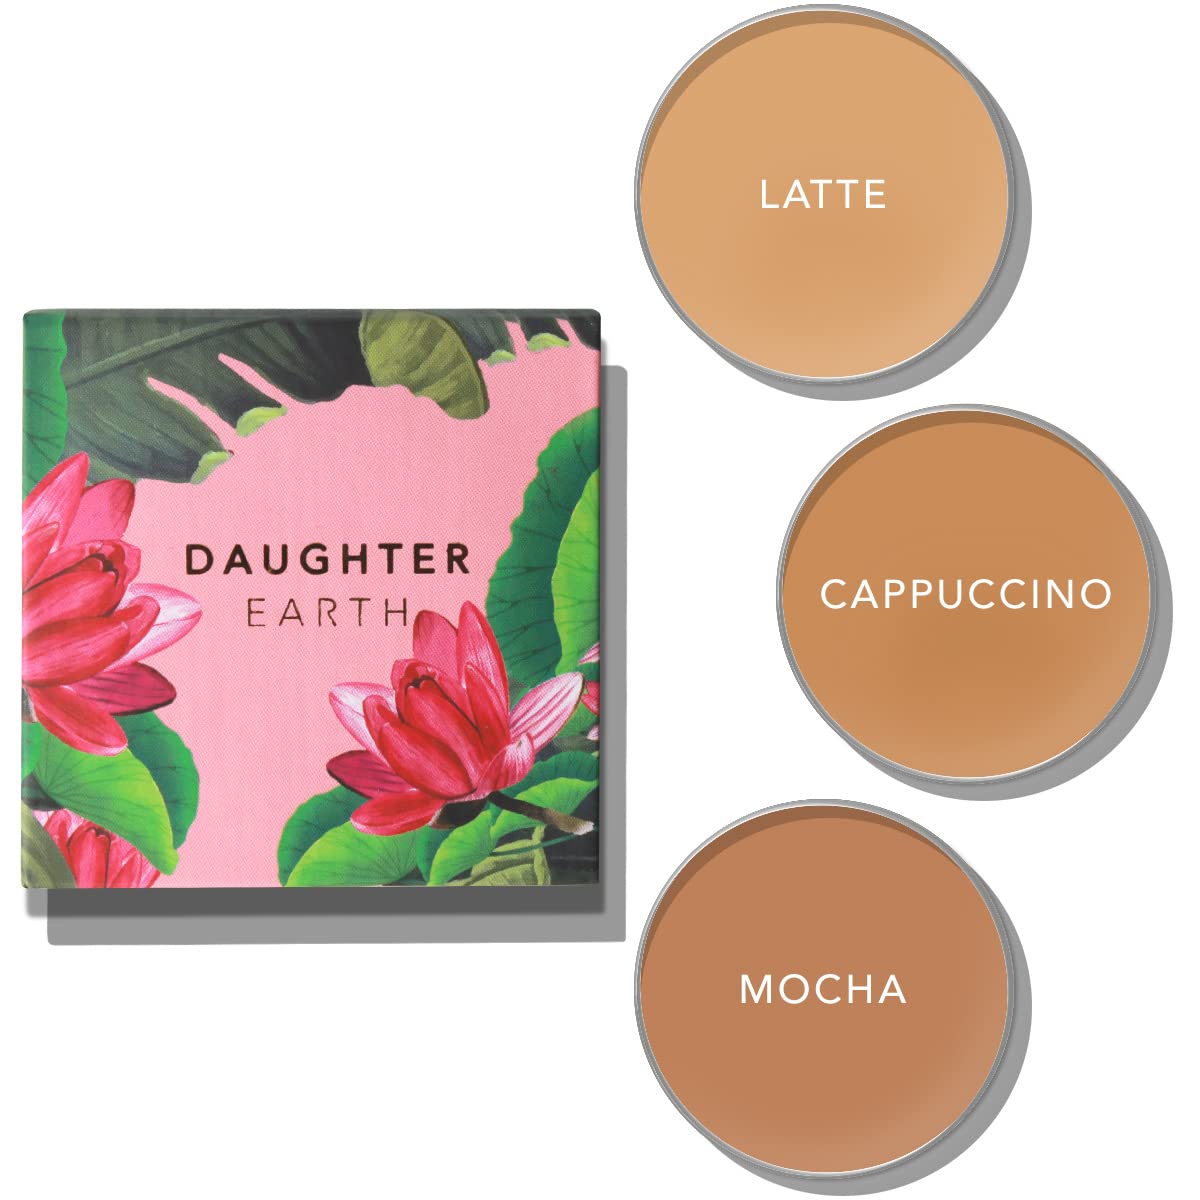 Daughter Earth + face + The Concealer + MOCHA + deal